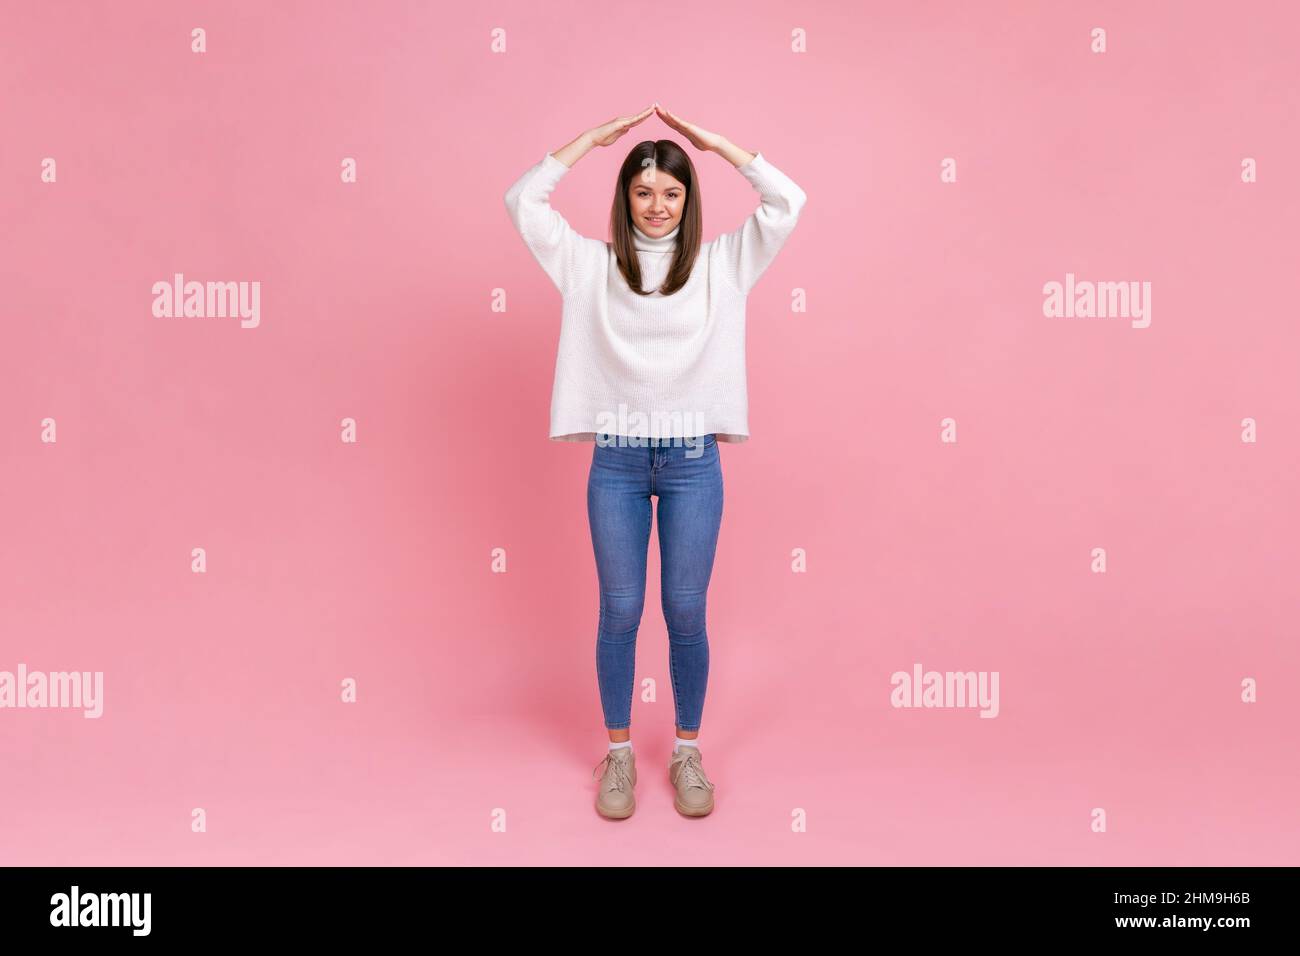 Full length portrait of attractive woman making roof of hands above head, feeling herself in safety, wearing white casual style sweater. Indoor studio shot isolated on pink background. Stock Photo